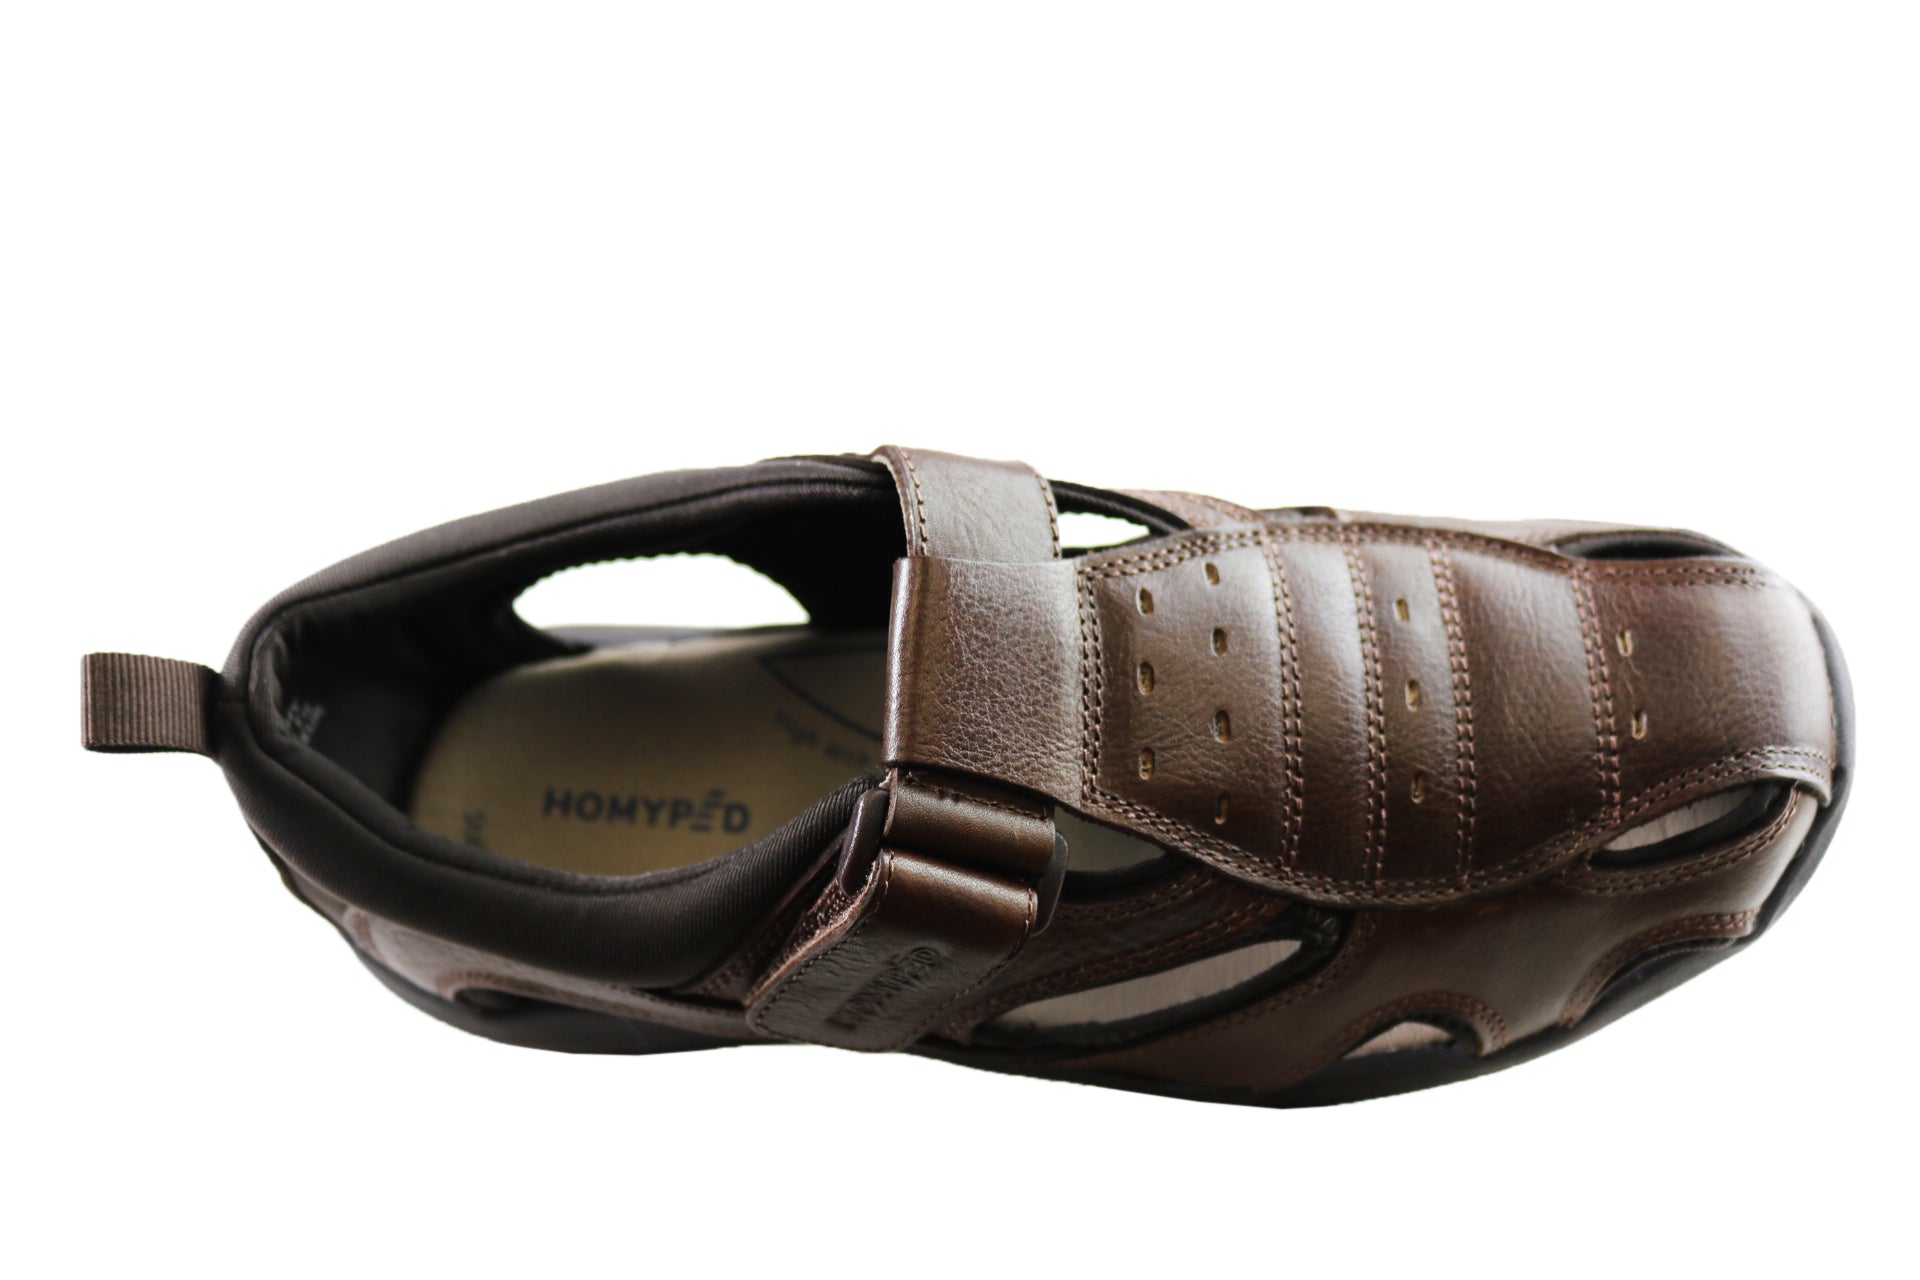 Homyped Smithy Mens Leather Supportive Extra Extra Wide Sandals